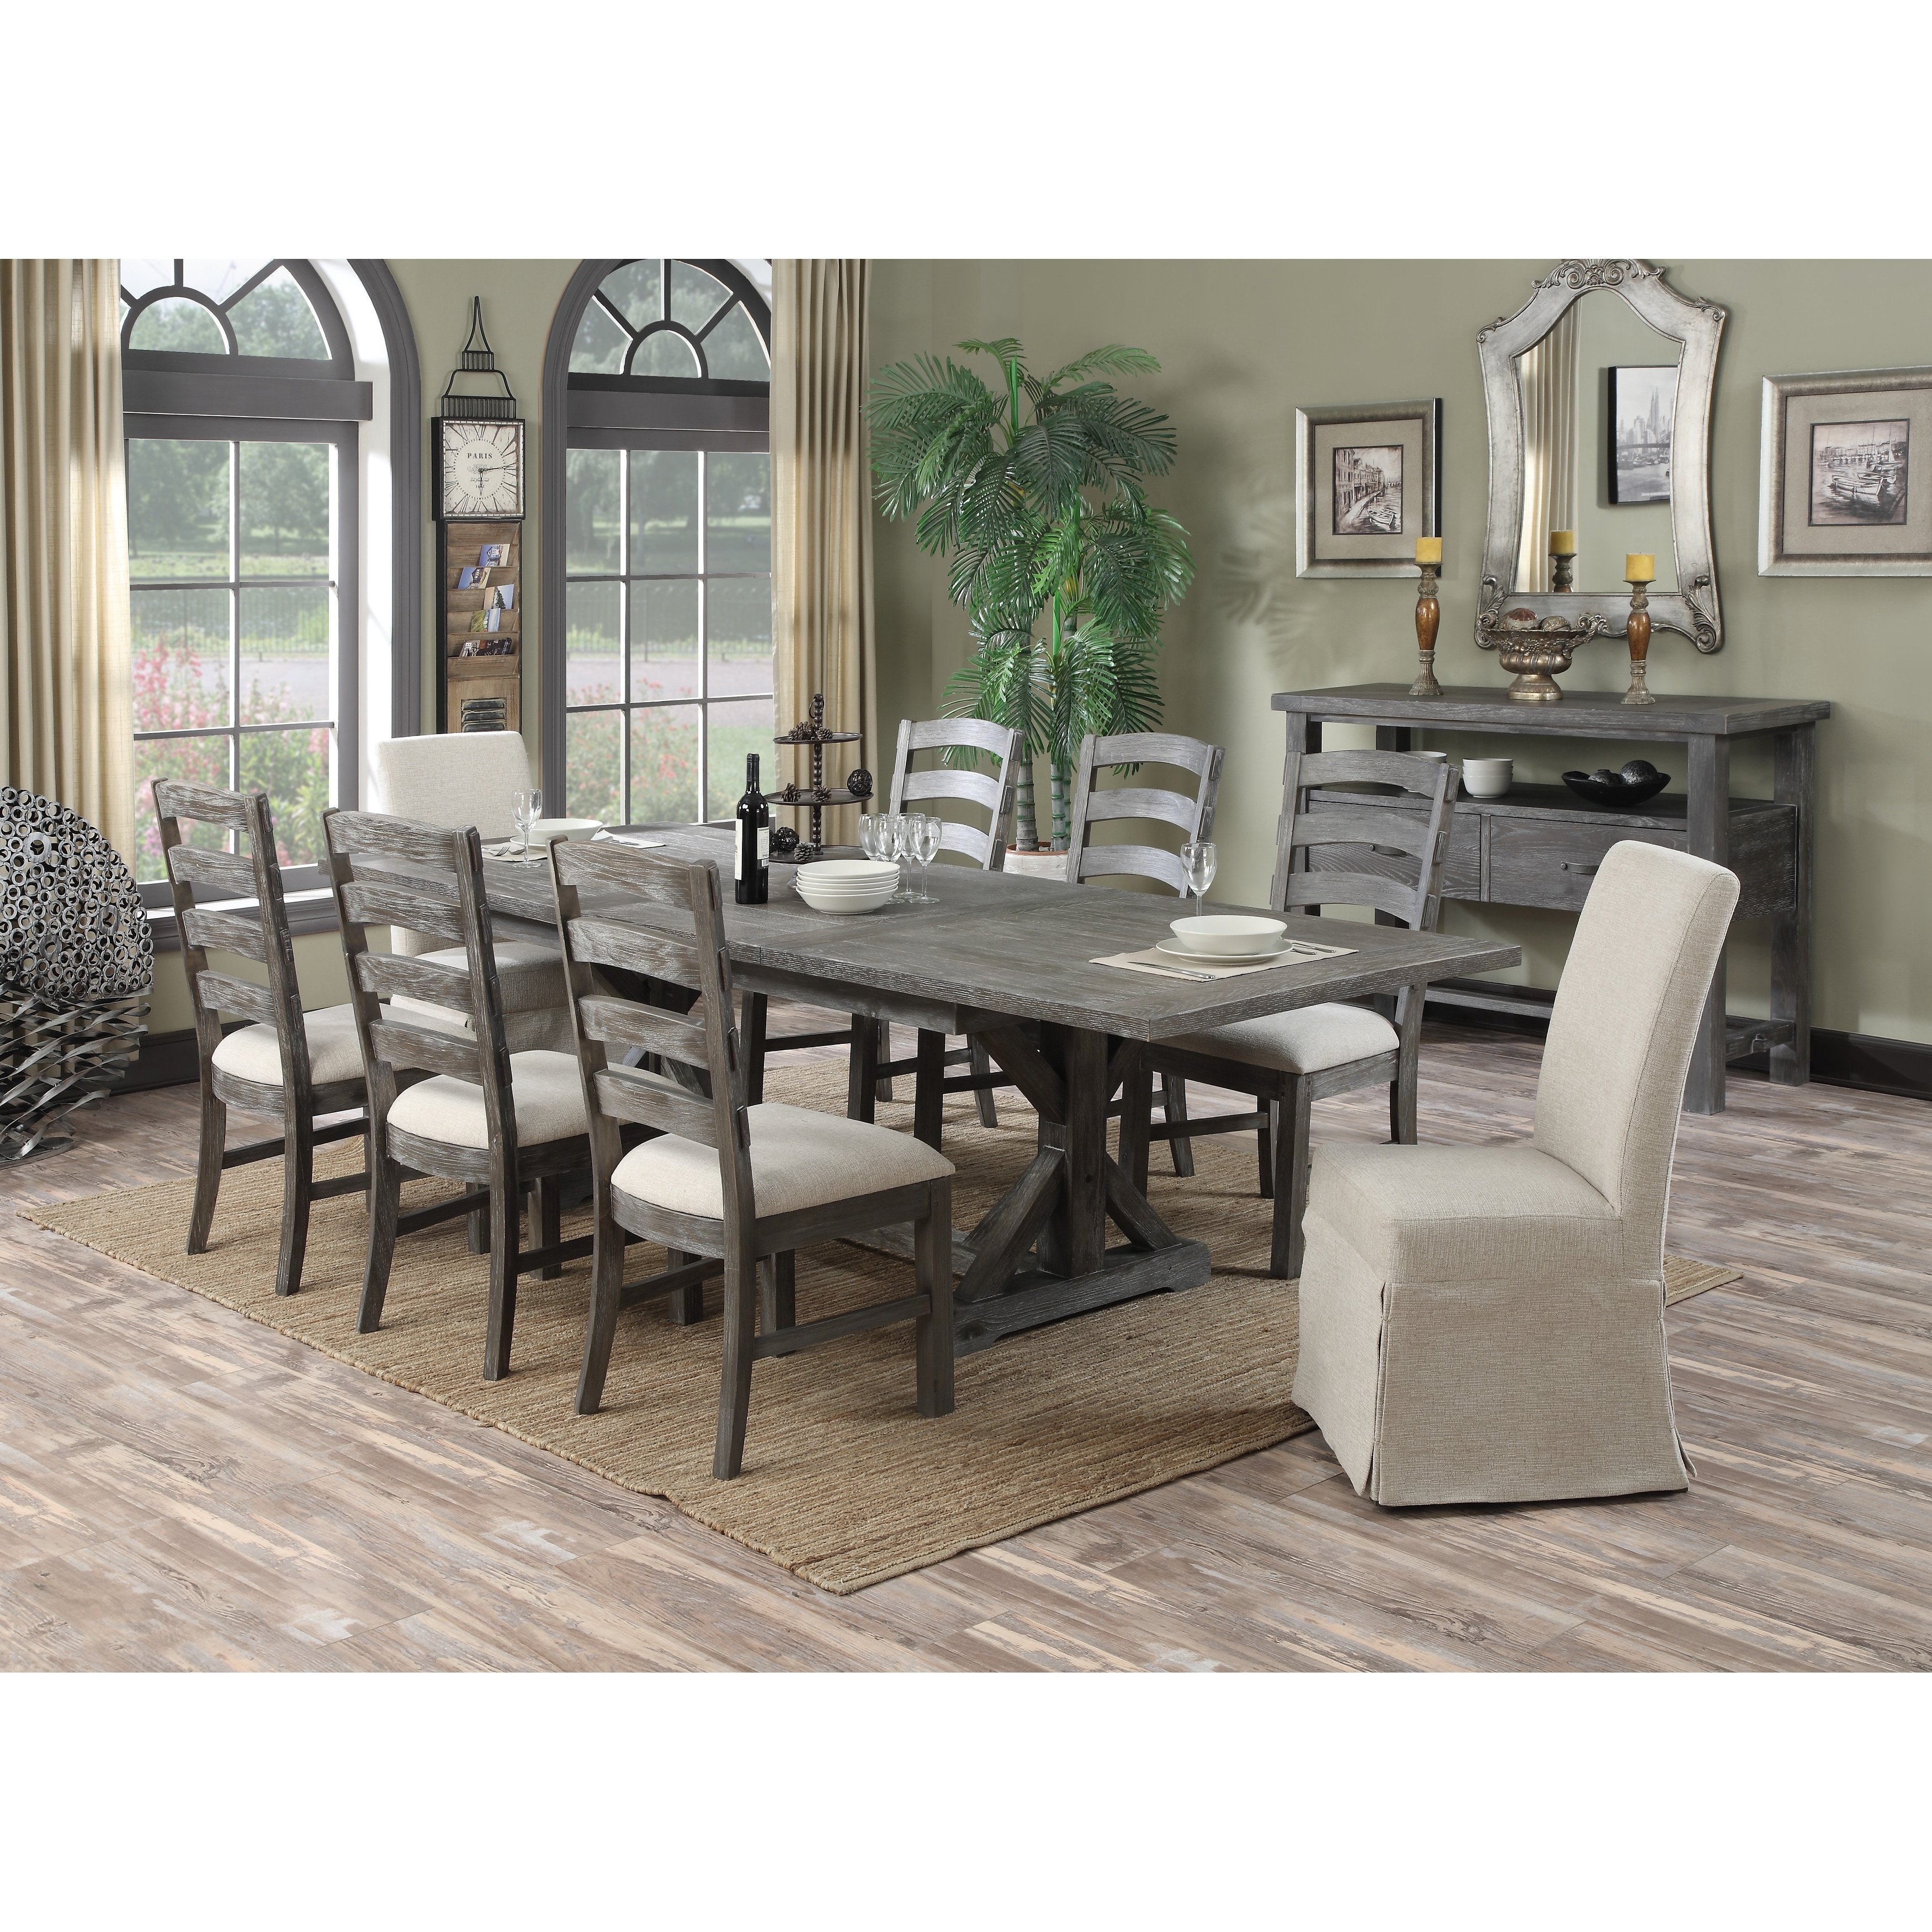 The Gray Barn Snowshill 5 Piece Rustic Dining Room Set Overstock 31635598